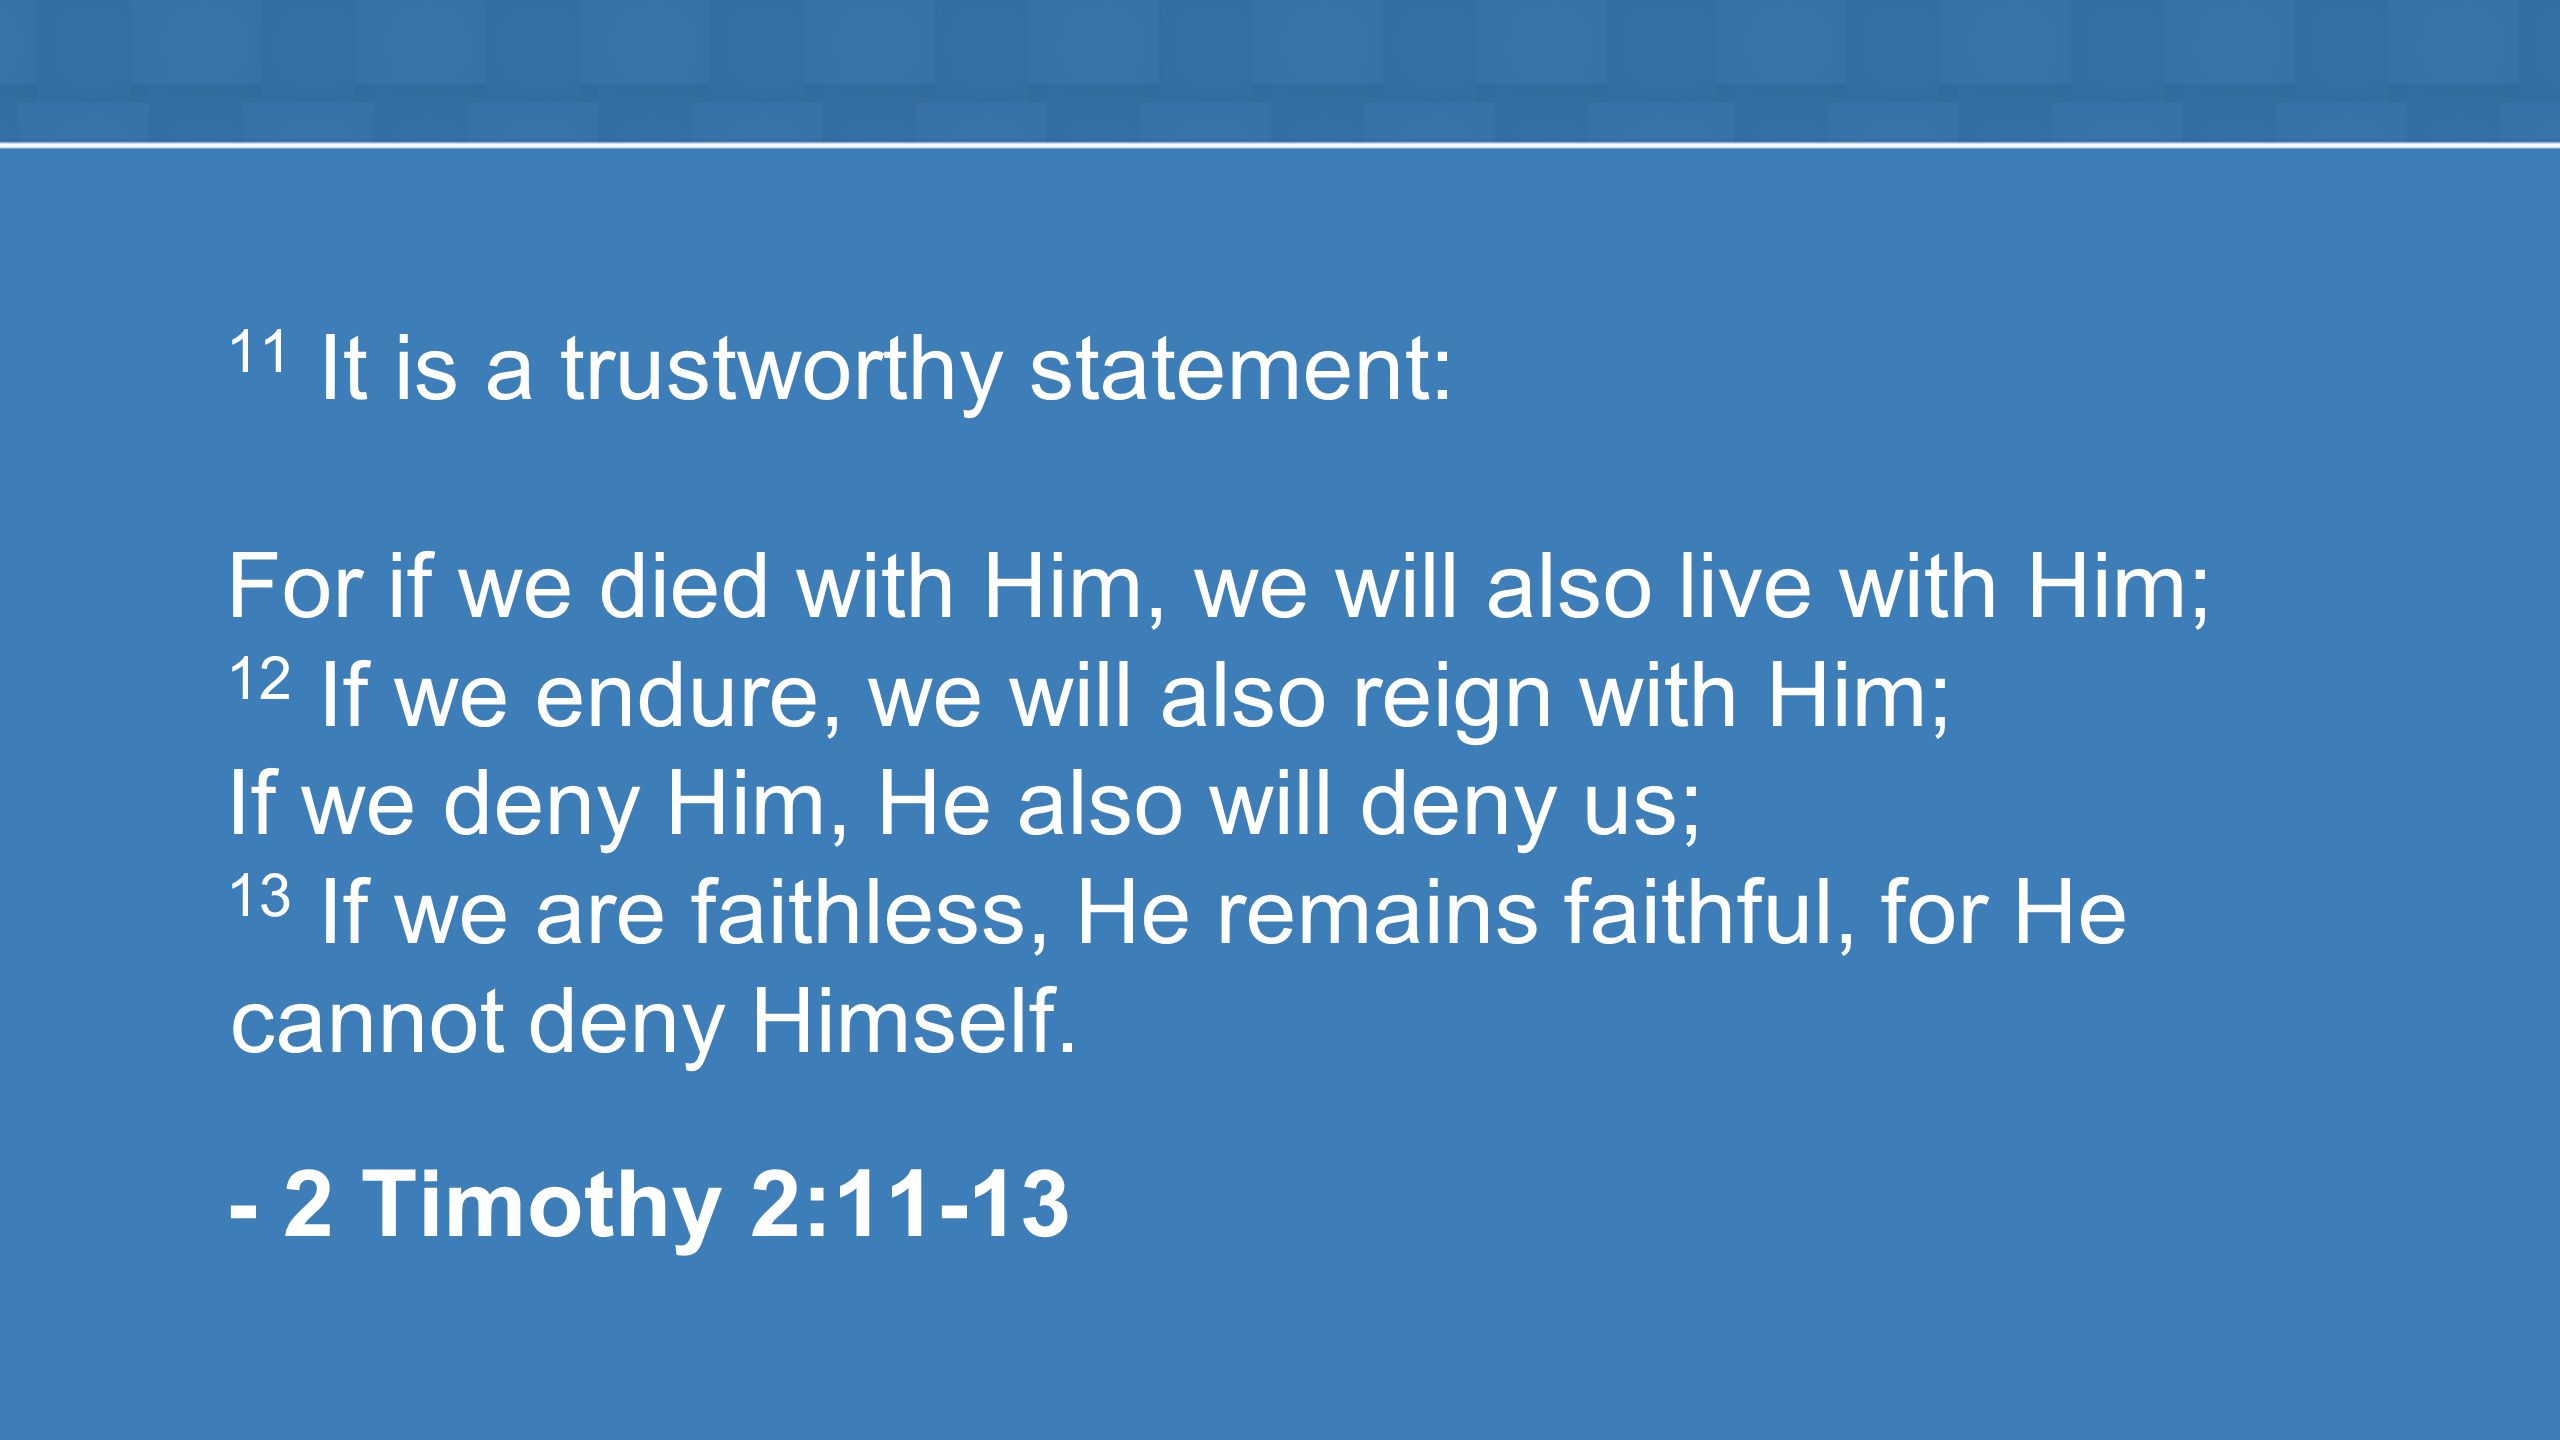 11 It is a trustworthy statement: For if we died with Him, we will also live with Him; 12 If we endure, we will also reign with Him; If we deny Him, He also will deny us; 13 If we are faithless, He remains faithful, for He cannot deny Himself.